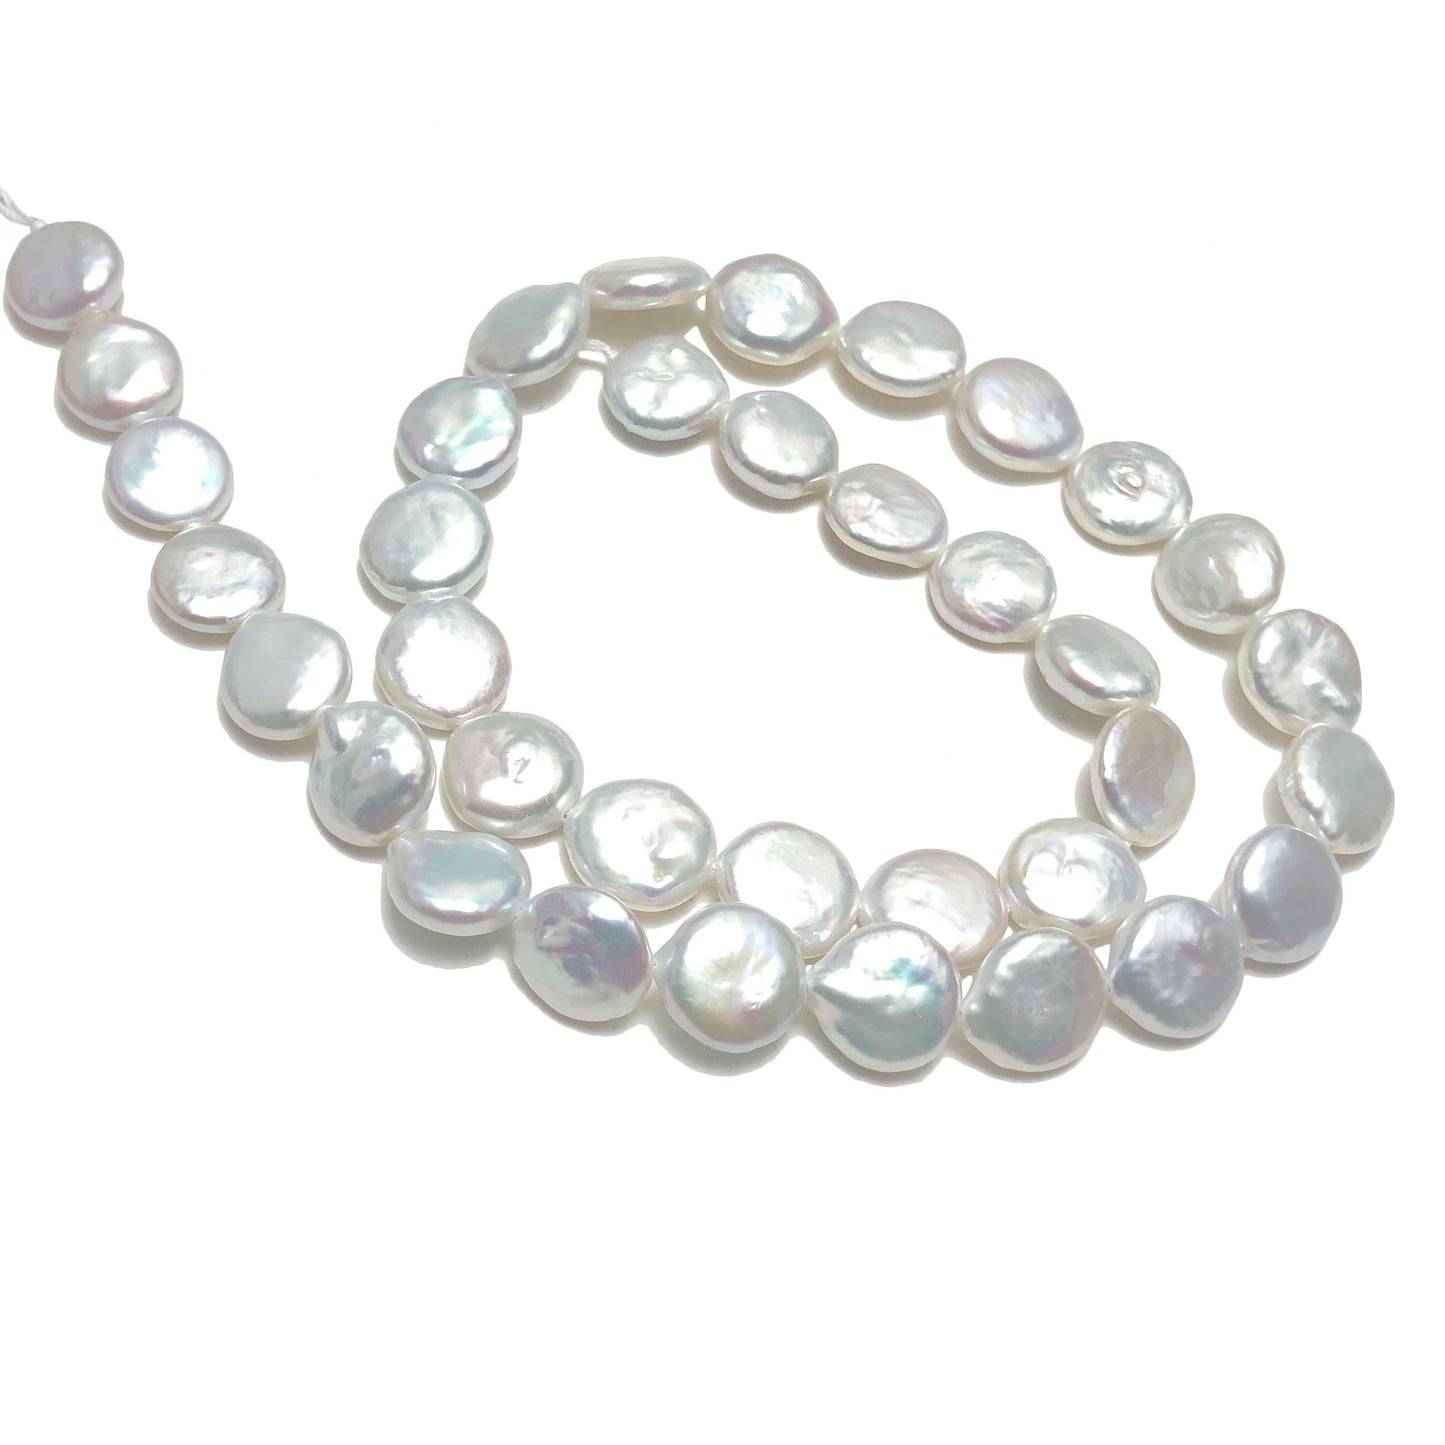 AAA Coin Pearls, 10-11mm White Color Freshwater Pearls,  Full Strand, SKU#  1179CN